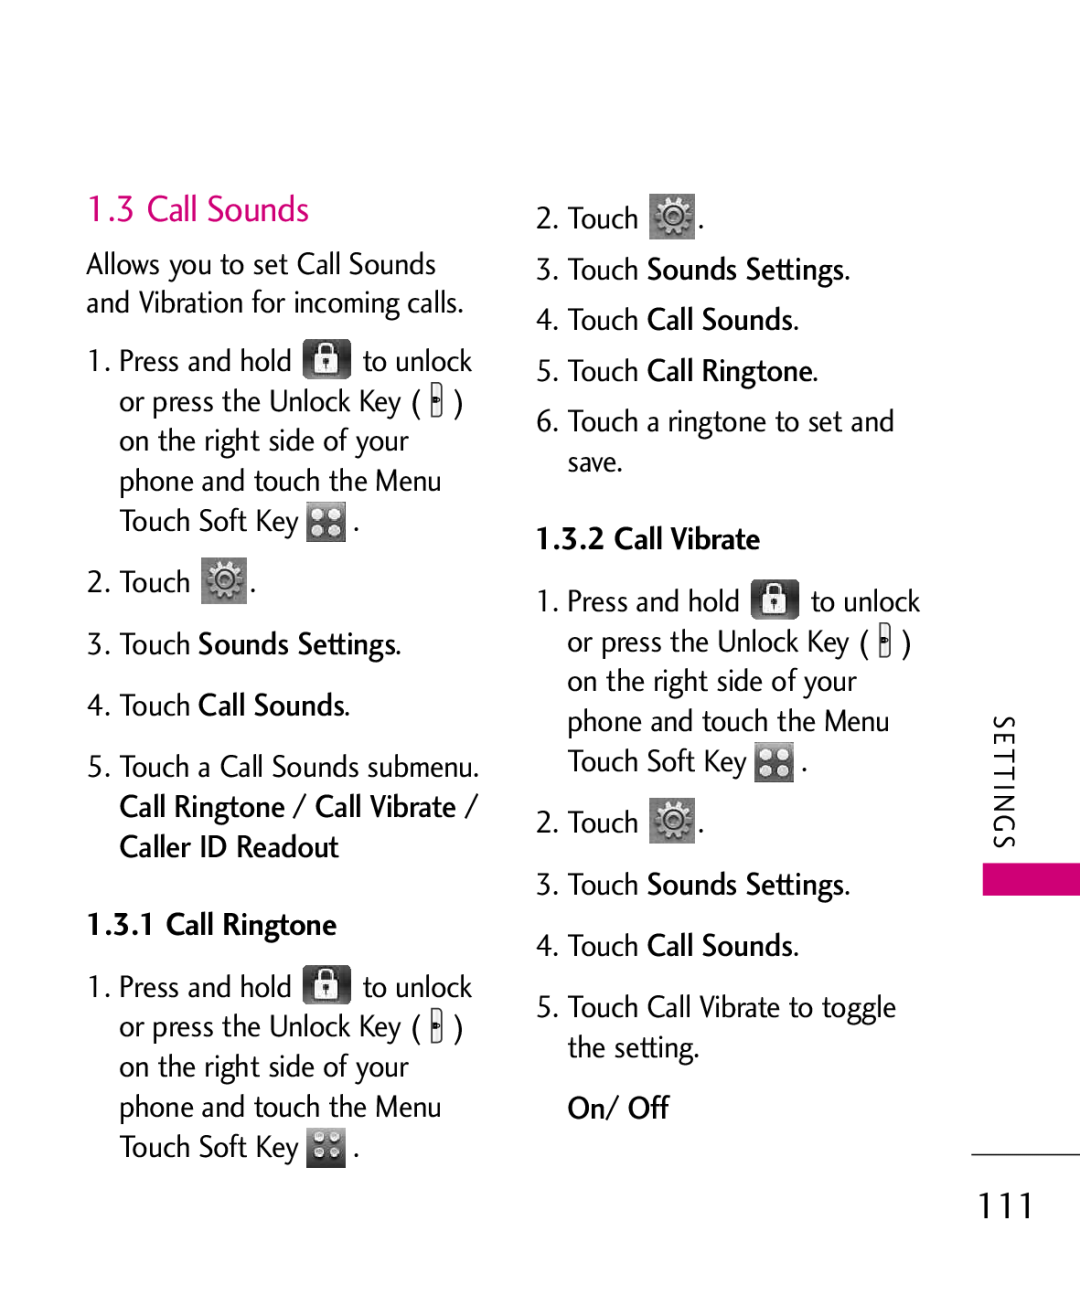 LG Electronics MMBB0379501 manual Touch Sounds Settings 4. Touch Call Sounds, Call Ringtone, Call Vibrate, On/ Off 